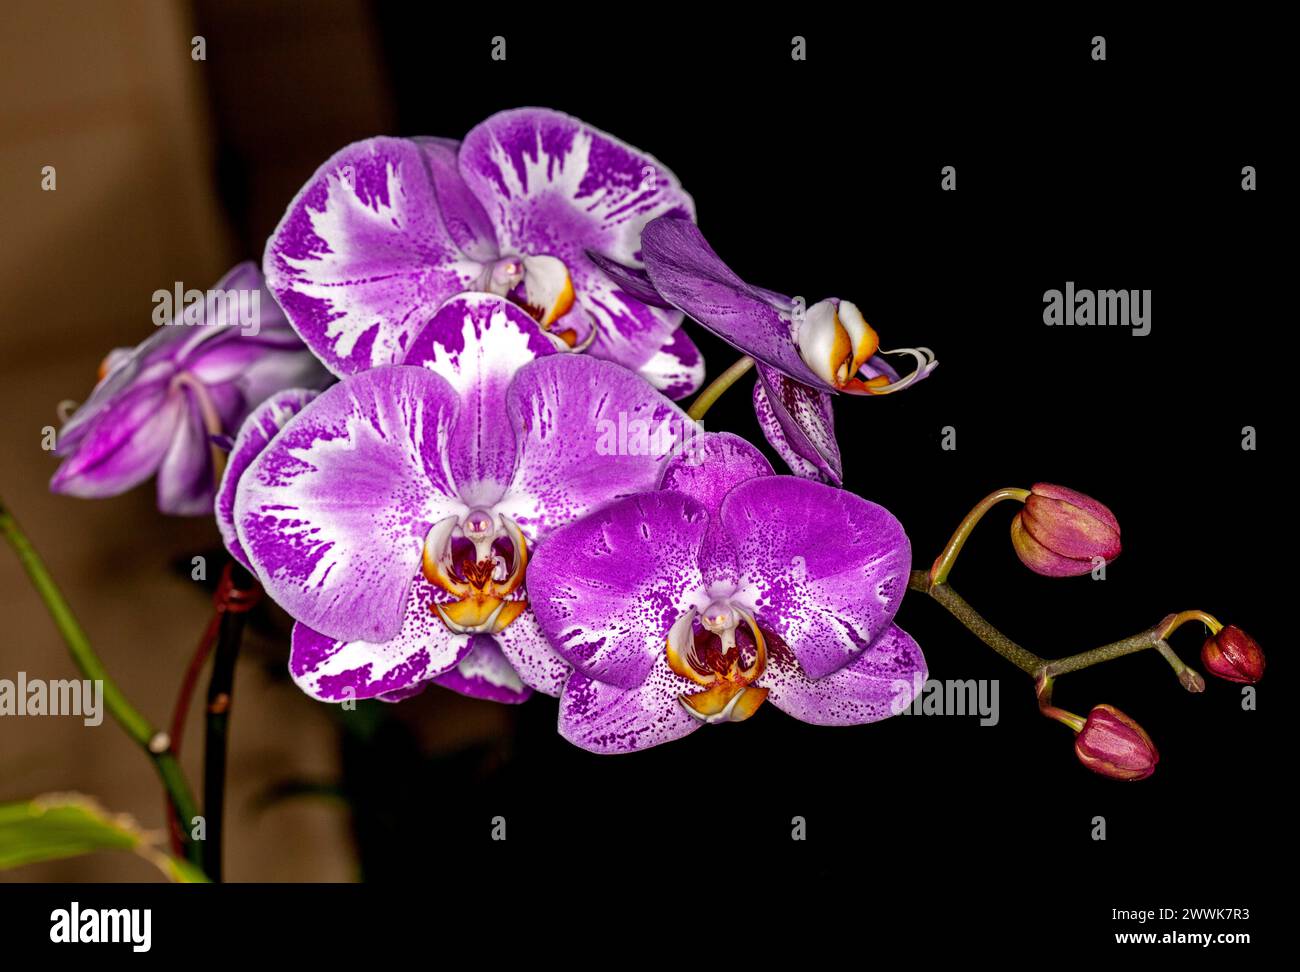 Cluster of spectacular large vivid purple and white flowers of Phalaenopsis orchid, Moth Orchid, against dark background Stock Photo